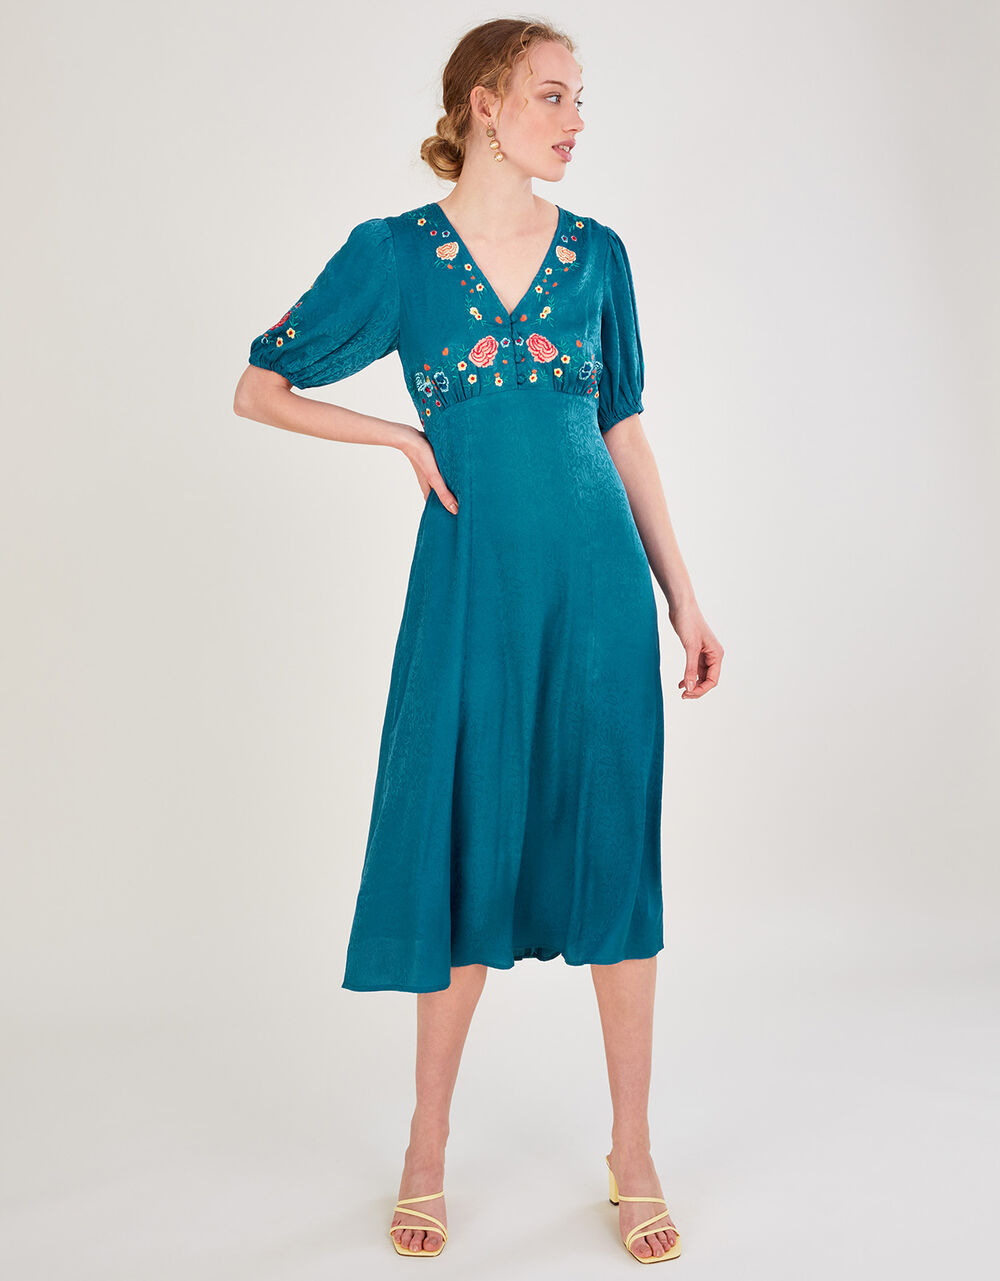 Women Dresses | Juliette Embroidered Jacquard Midi Dress in Recycled Polyester Teal - KO50006